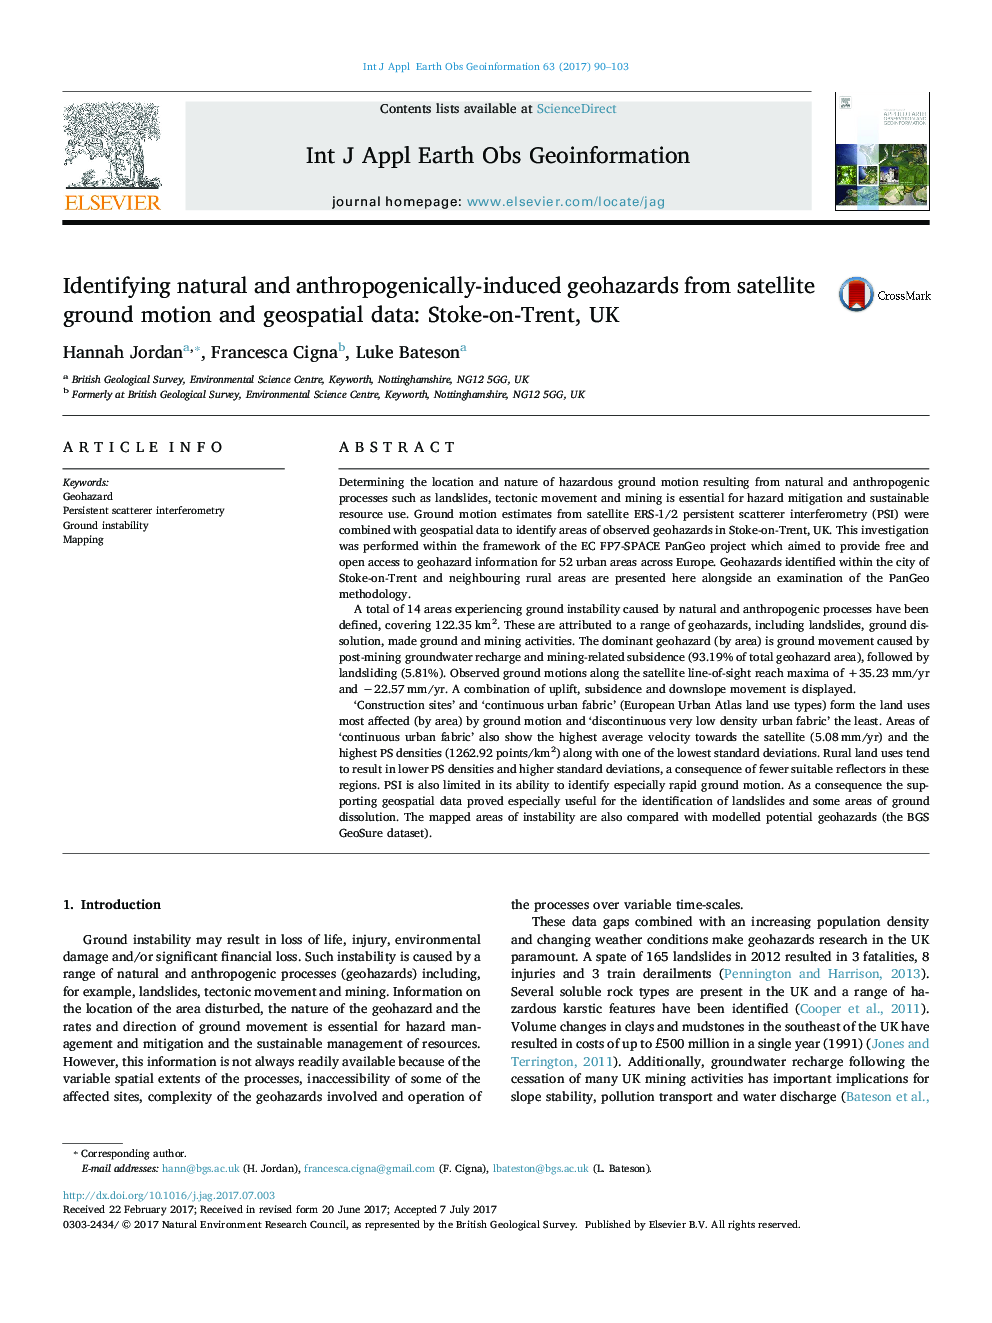 Identifying natural and anthropogenically-induced geohazards from satellite ground motion and geospatial data: Stoke-on-Trent, UK